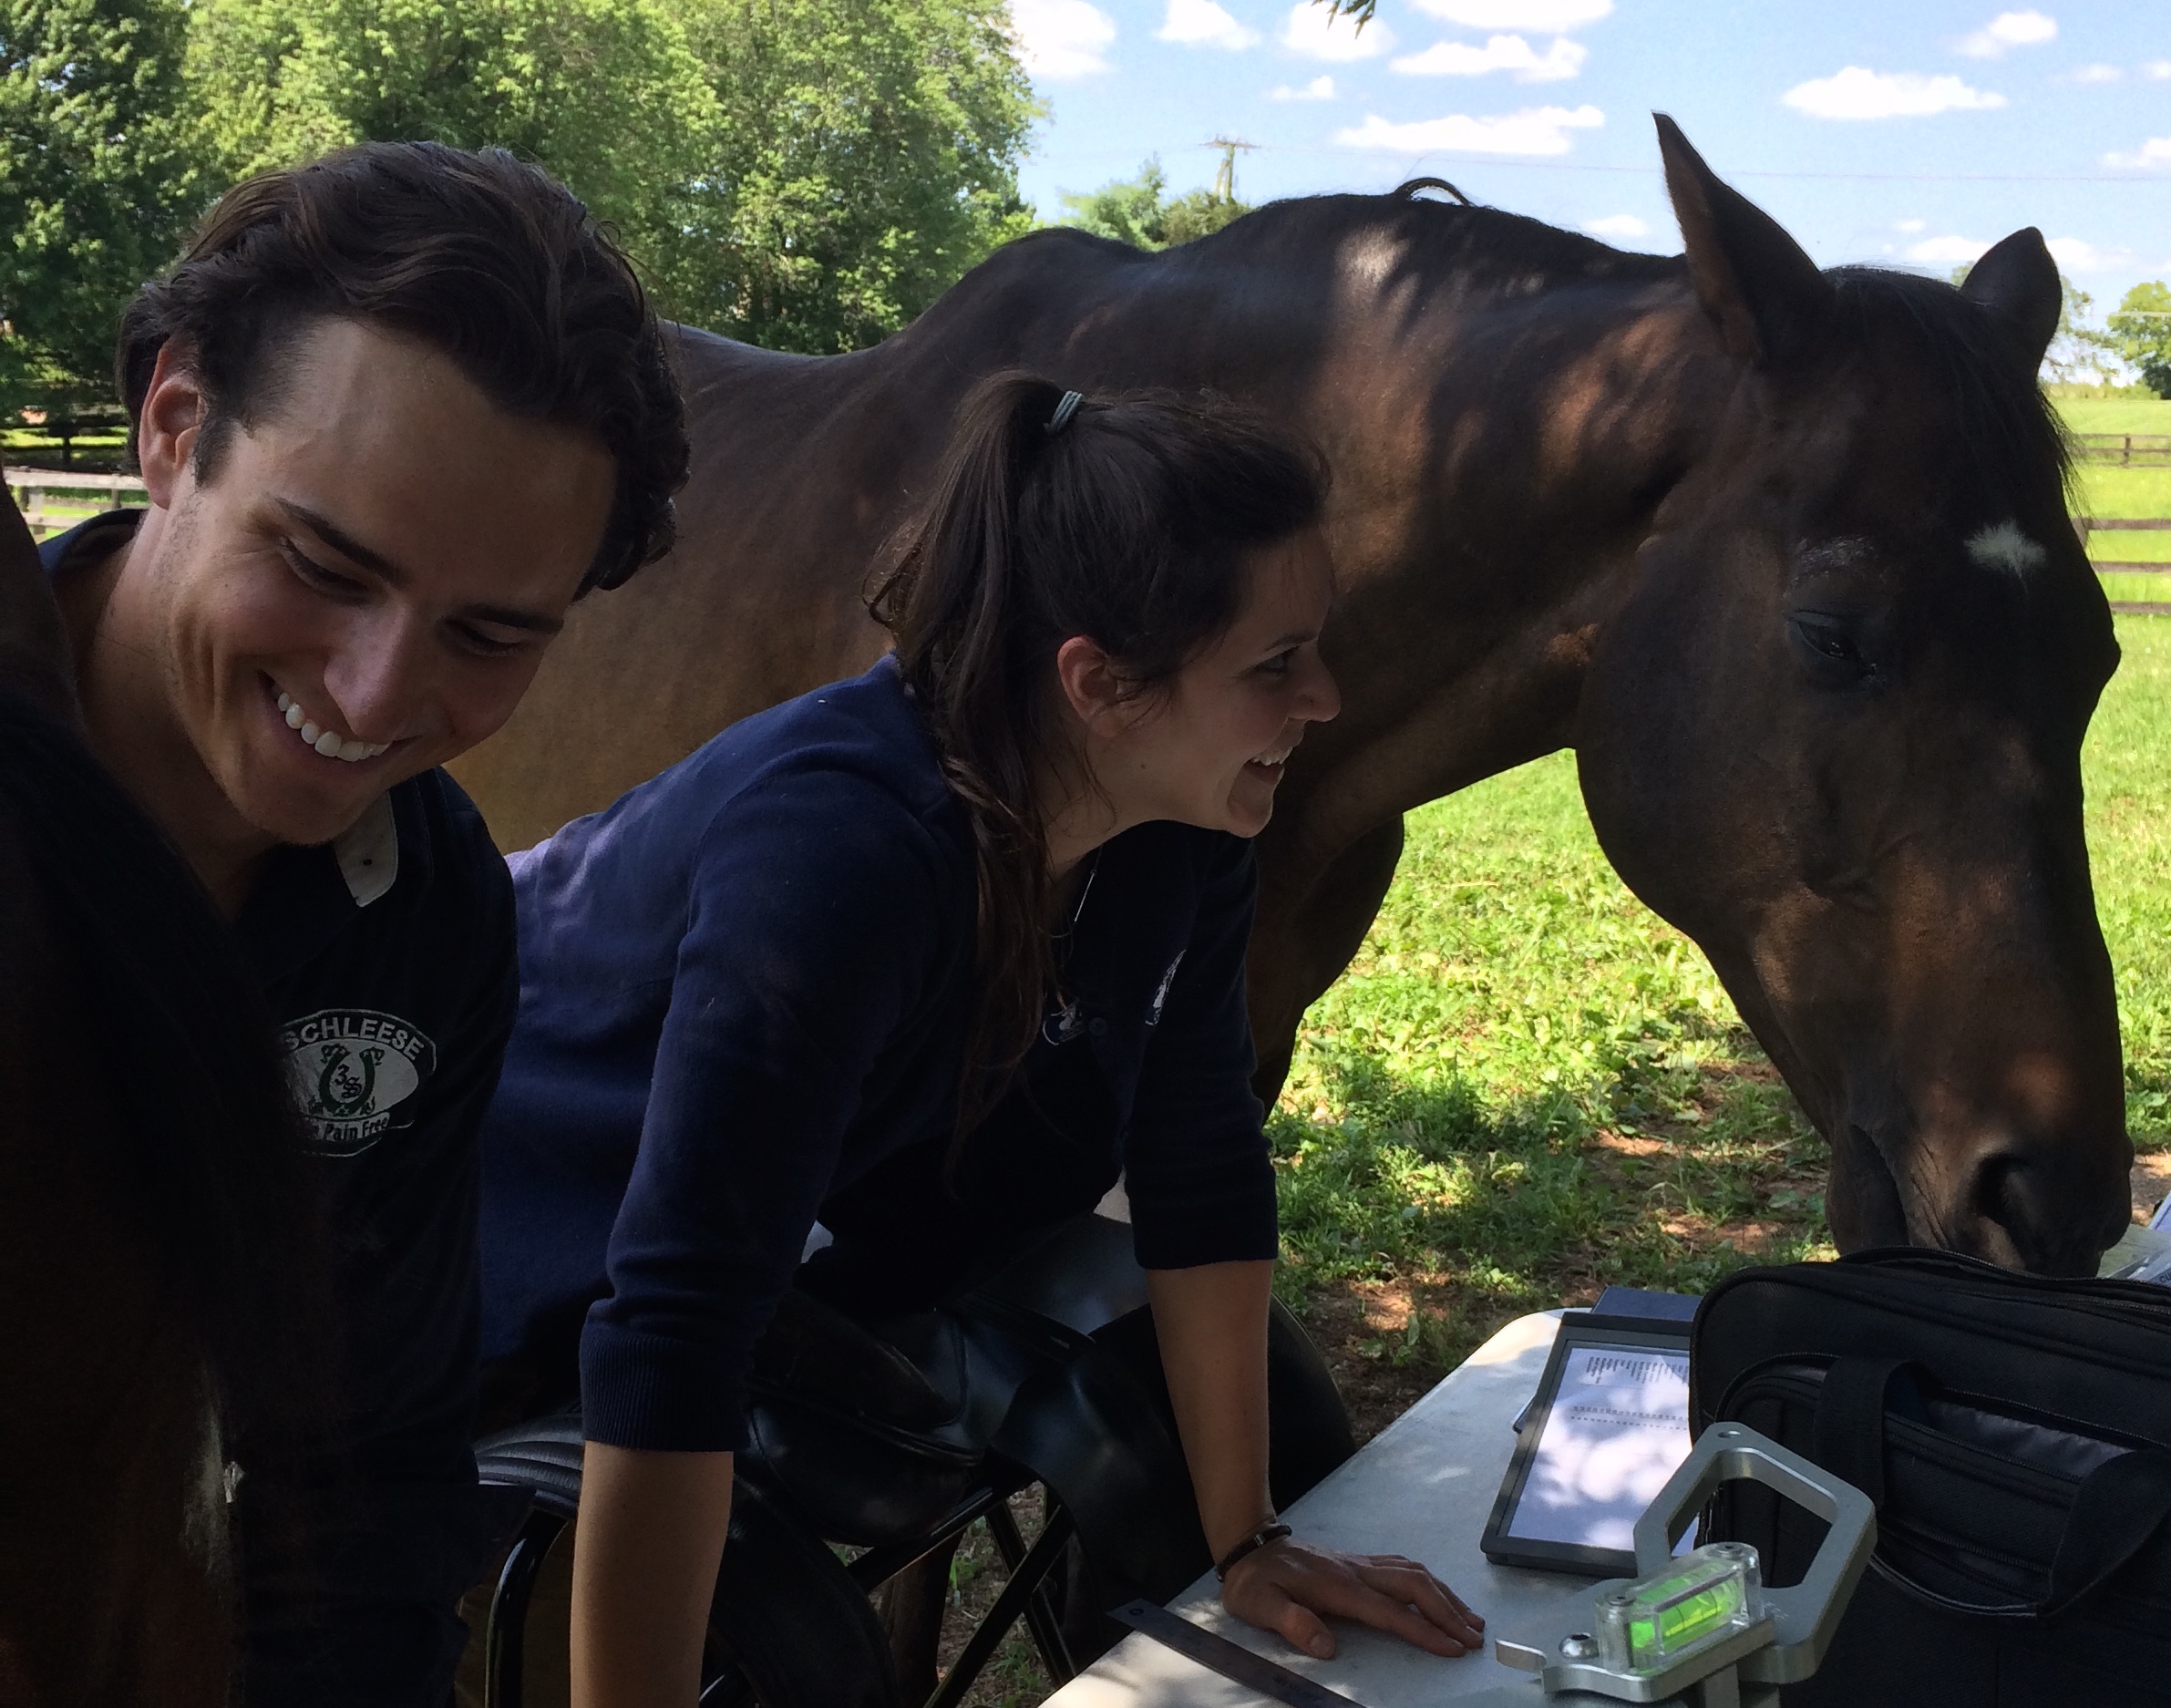 Aaron Backx-SFT & Alexa Frye-CSM doing what they do best - Helping Horses!